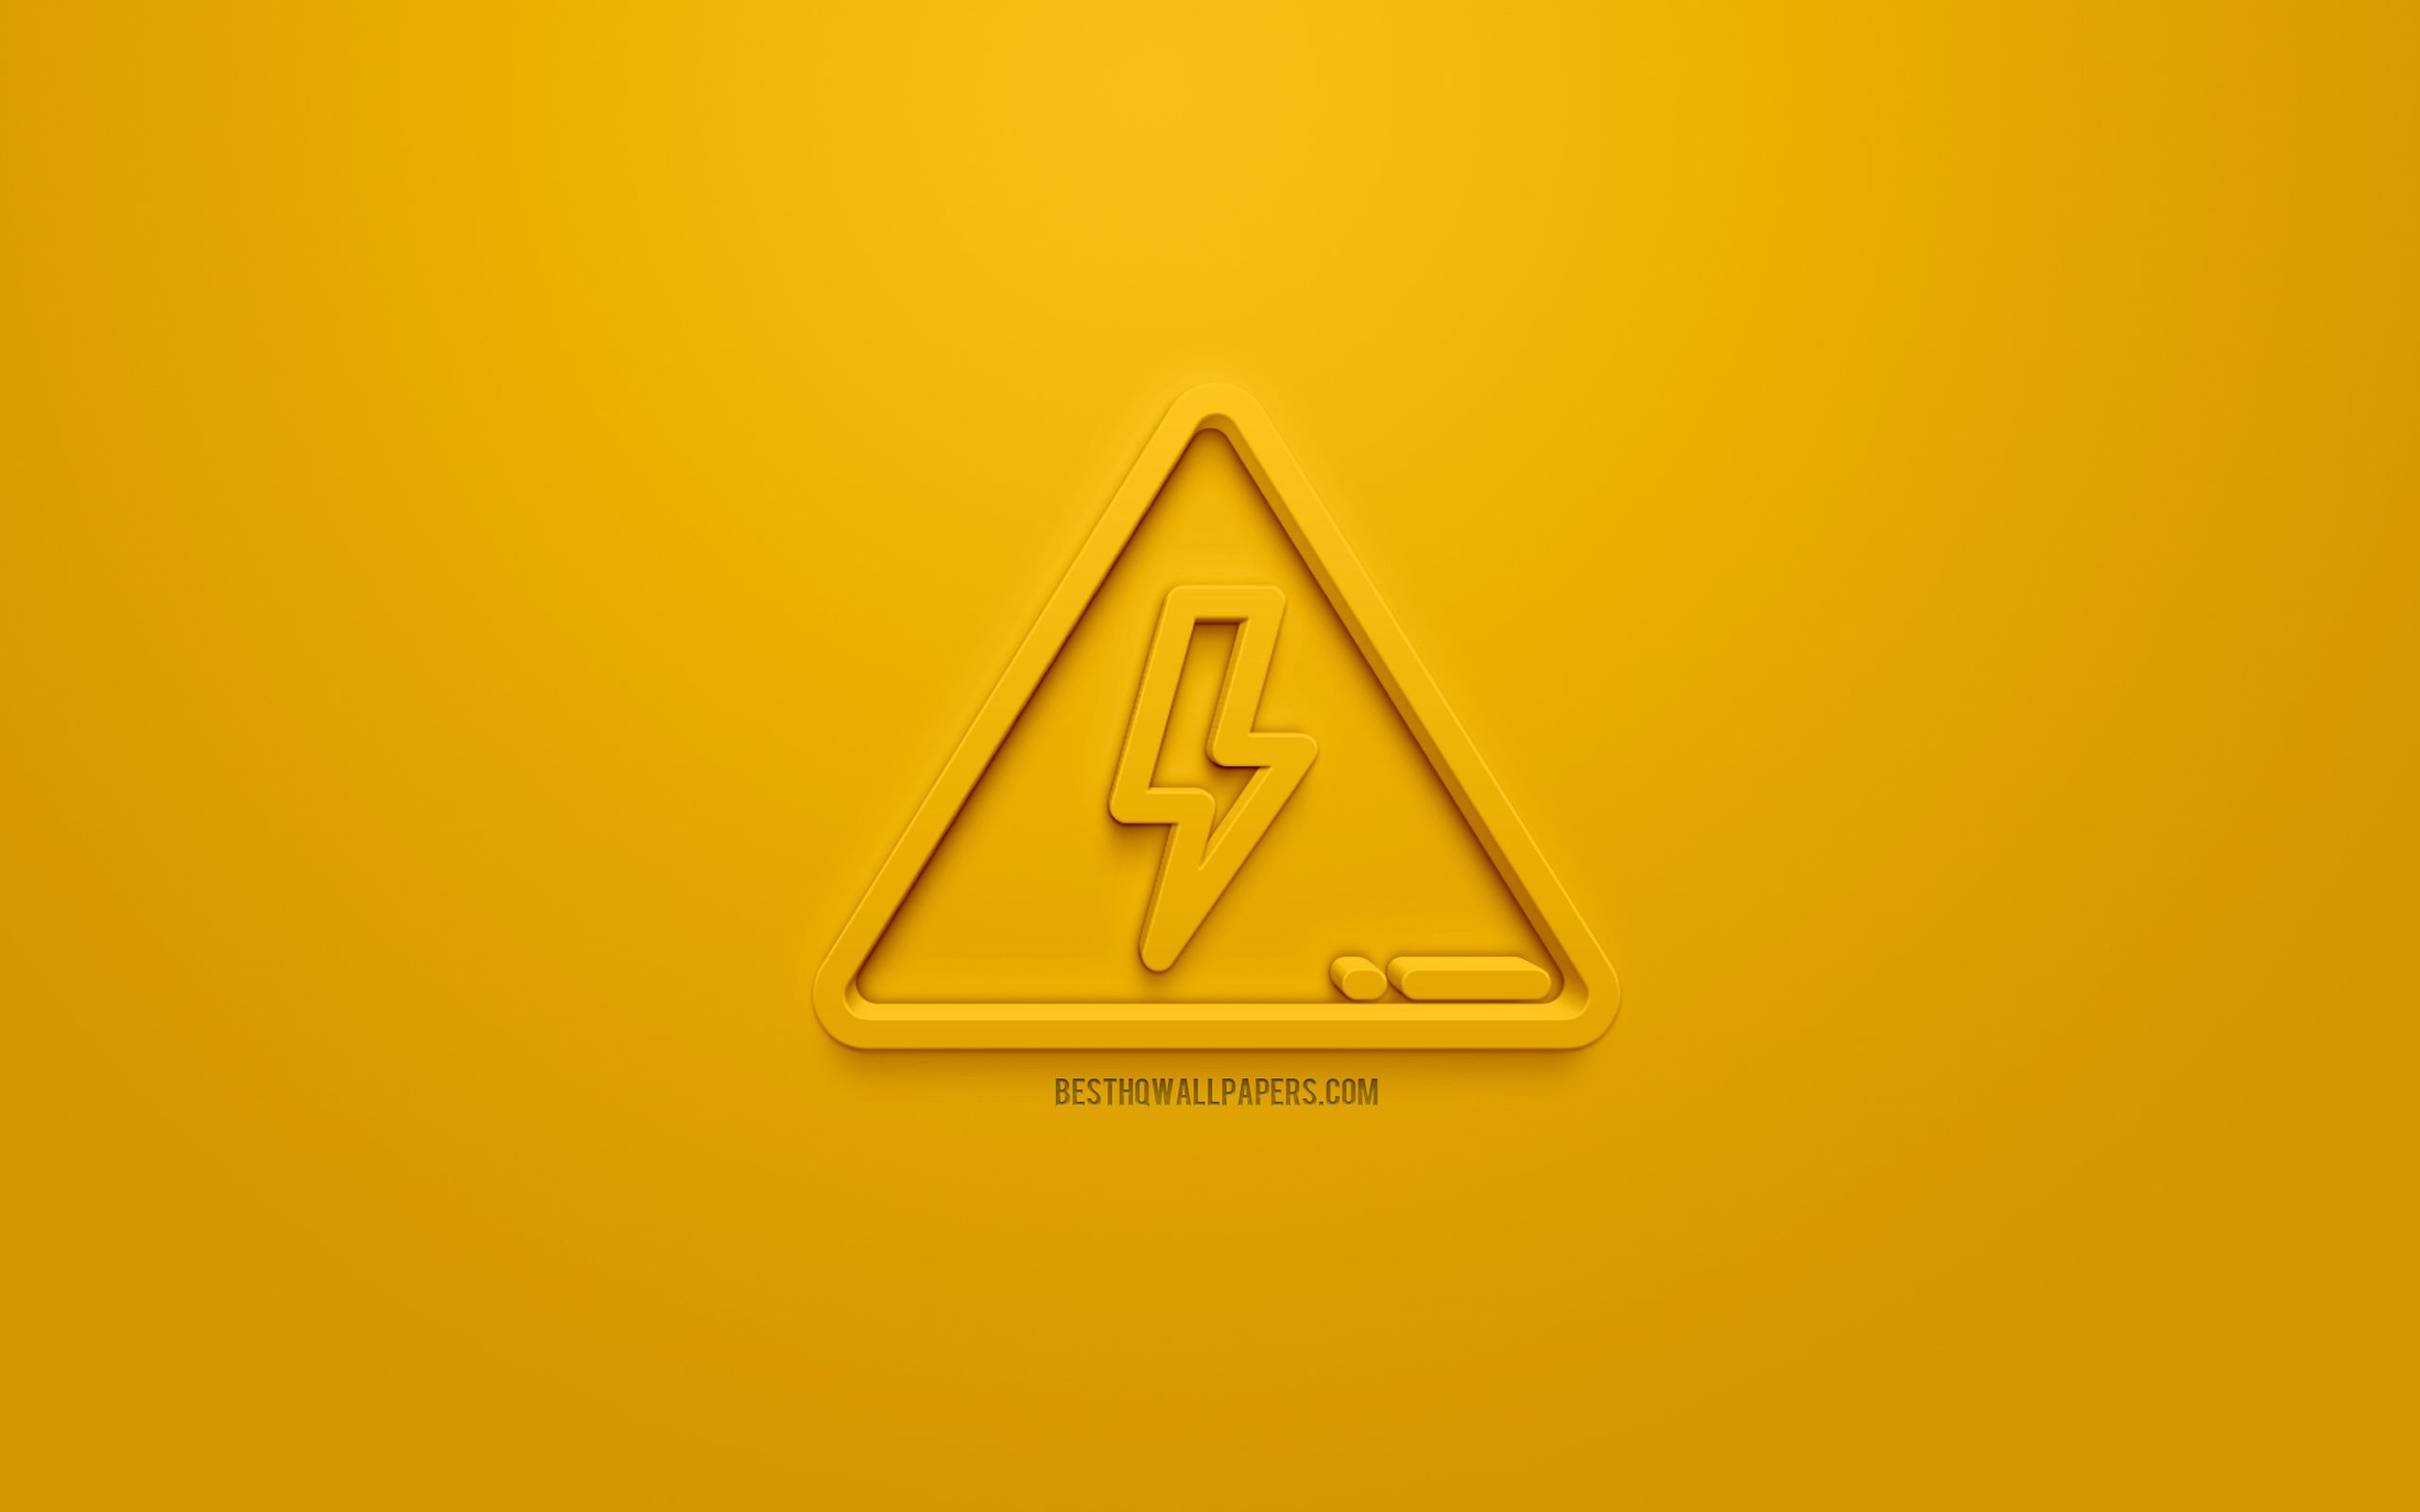 Download wallpaper High Voltage 3D icon, yellow background, 3D symbols, High Voltage, creative 3D art, 3D icons, High Voltage sign, warning signs for desktop with resolution 2560x1600. High Quality HD picture wallpaper